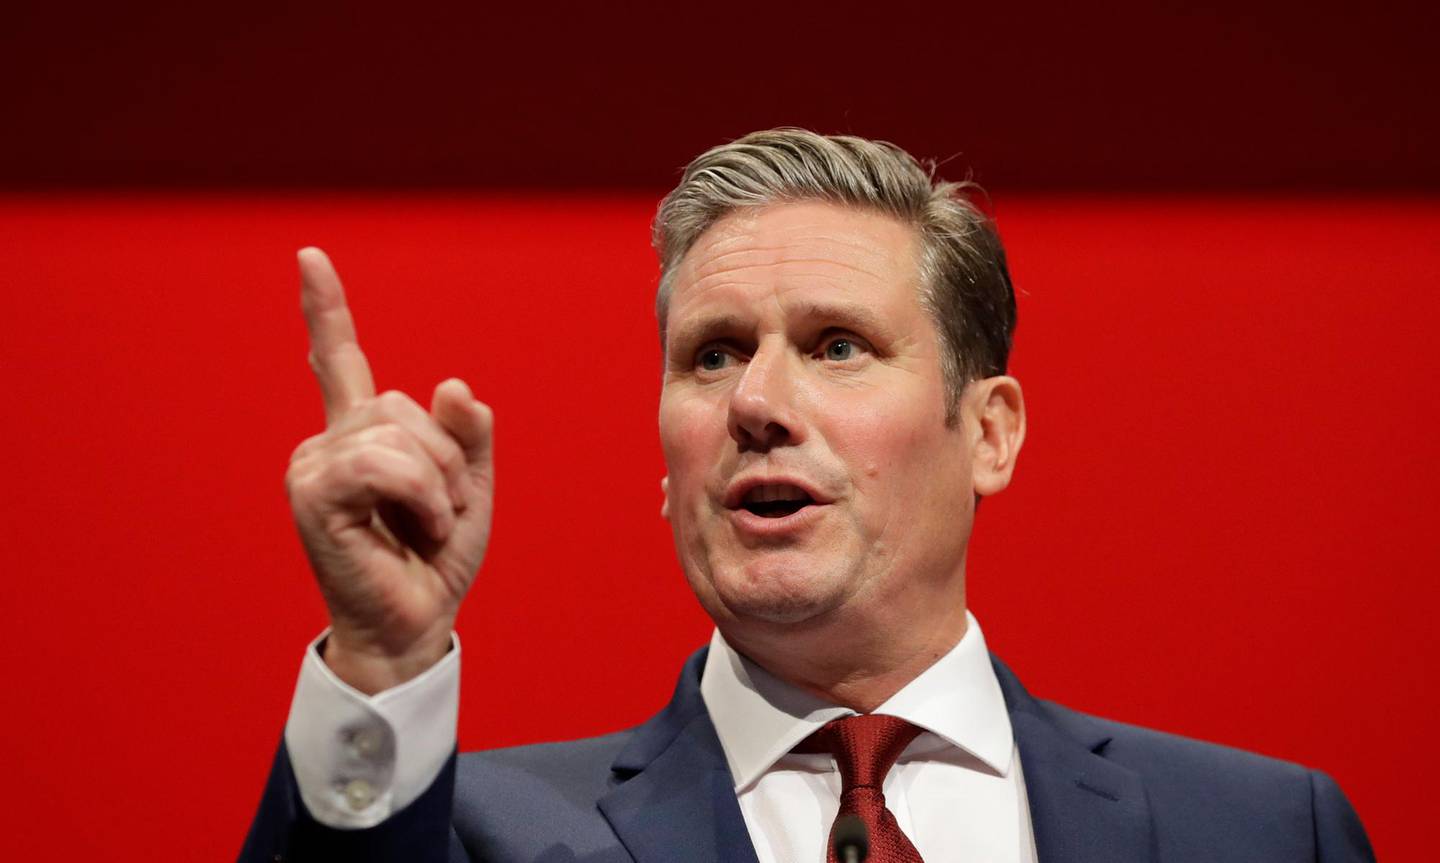 Britain's Shadow Brexit Secretary Keir Starmer speaks on stage during the Labour Party Conference at the Brighton Centre in Brighton, England, Monday, Sept. 23, 2019. (AP Photo/Kirsty Wigglesworth)